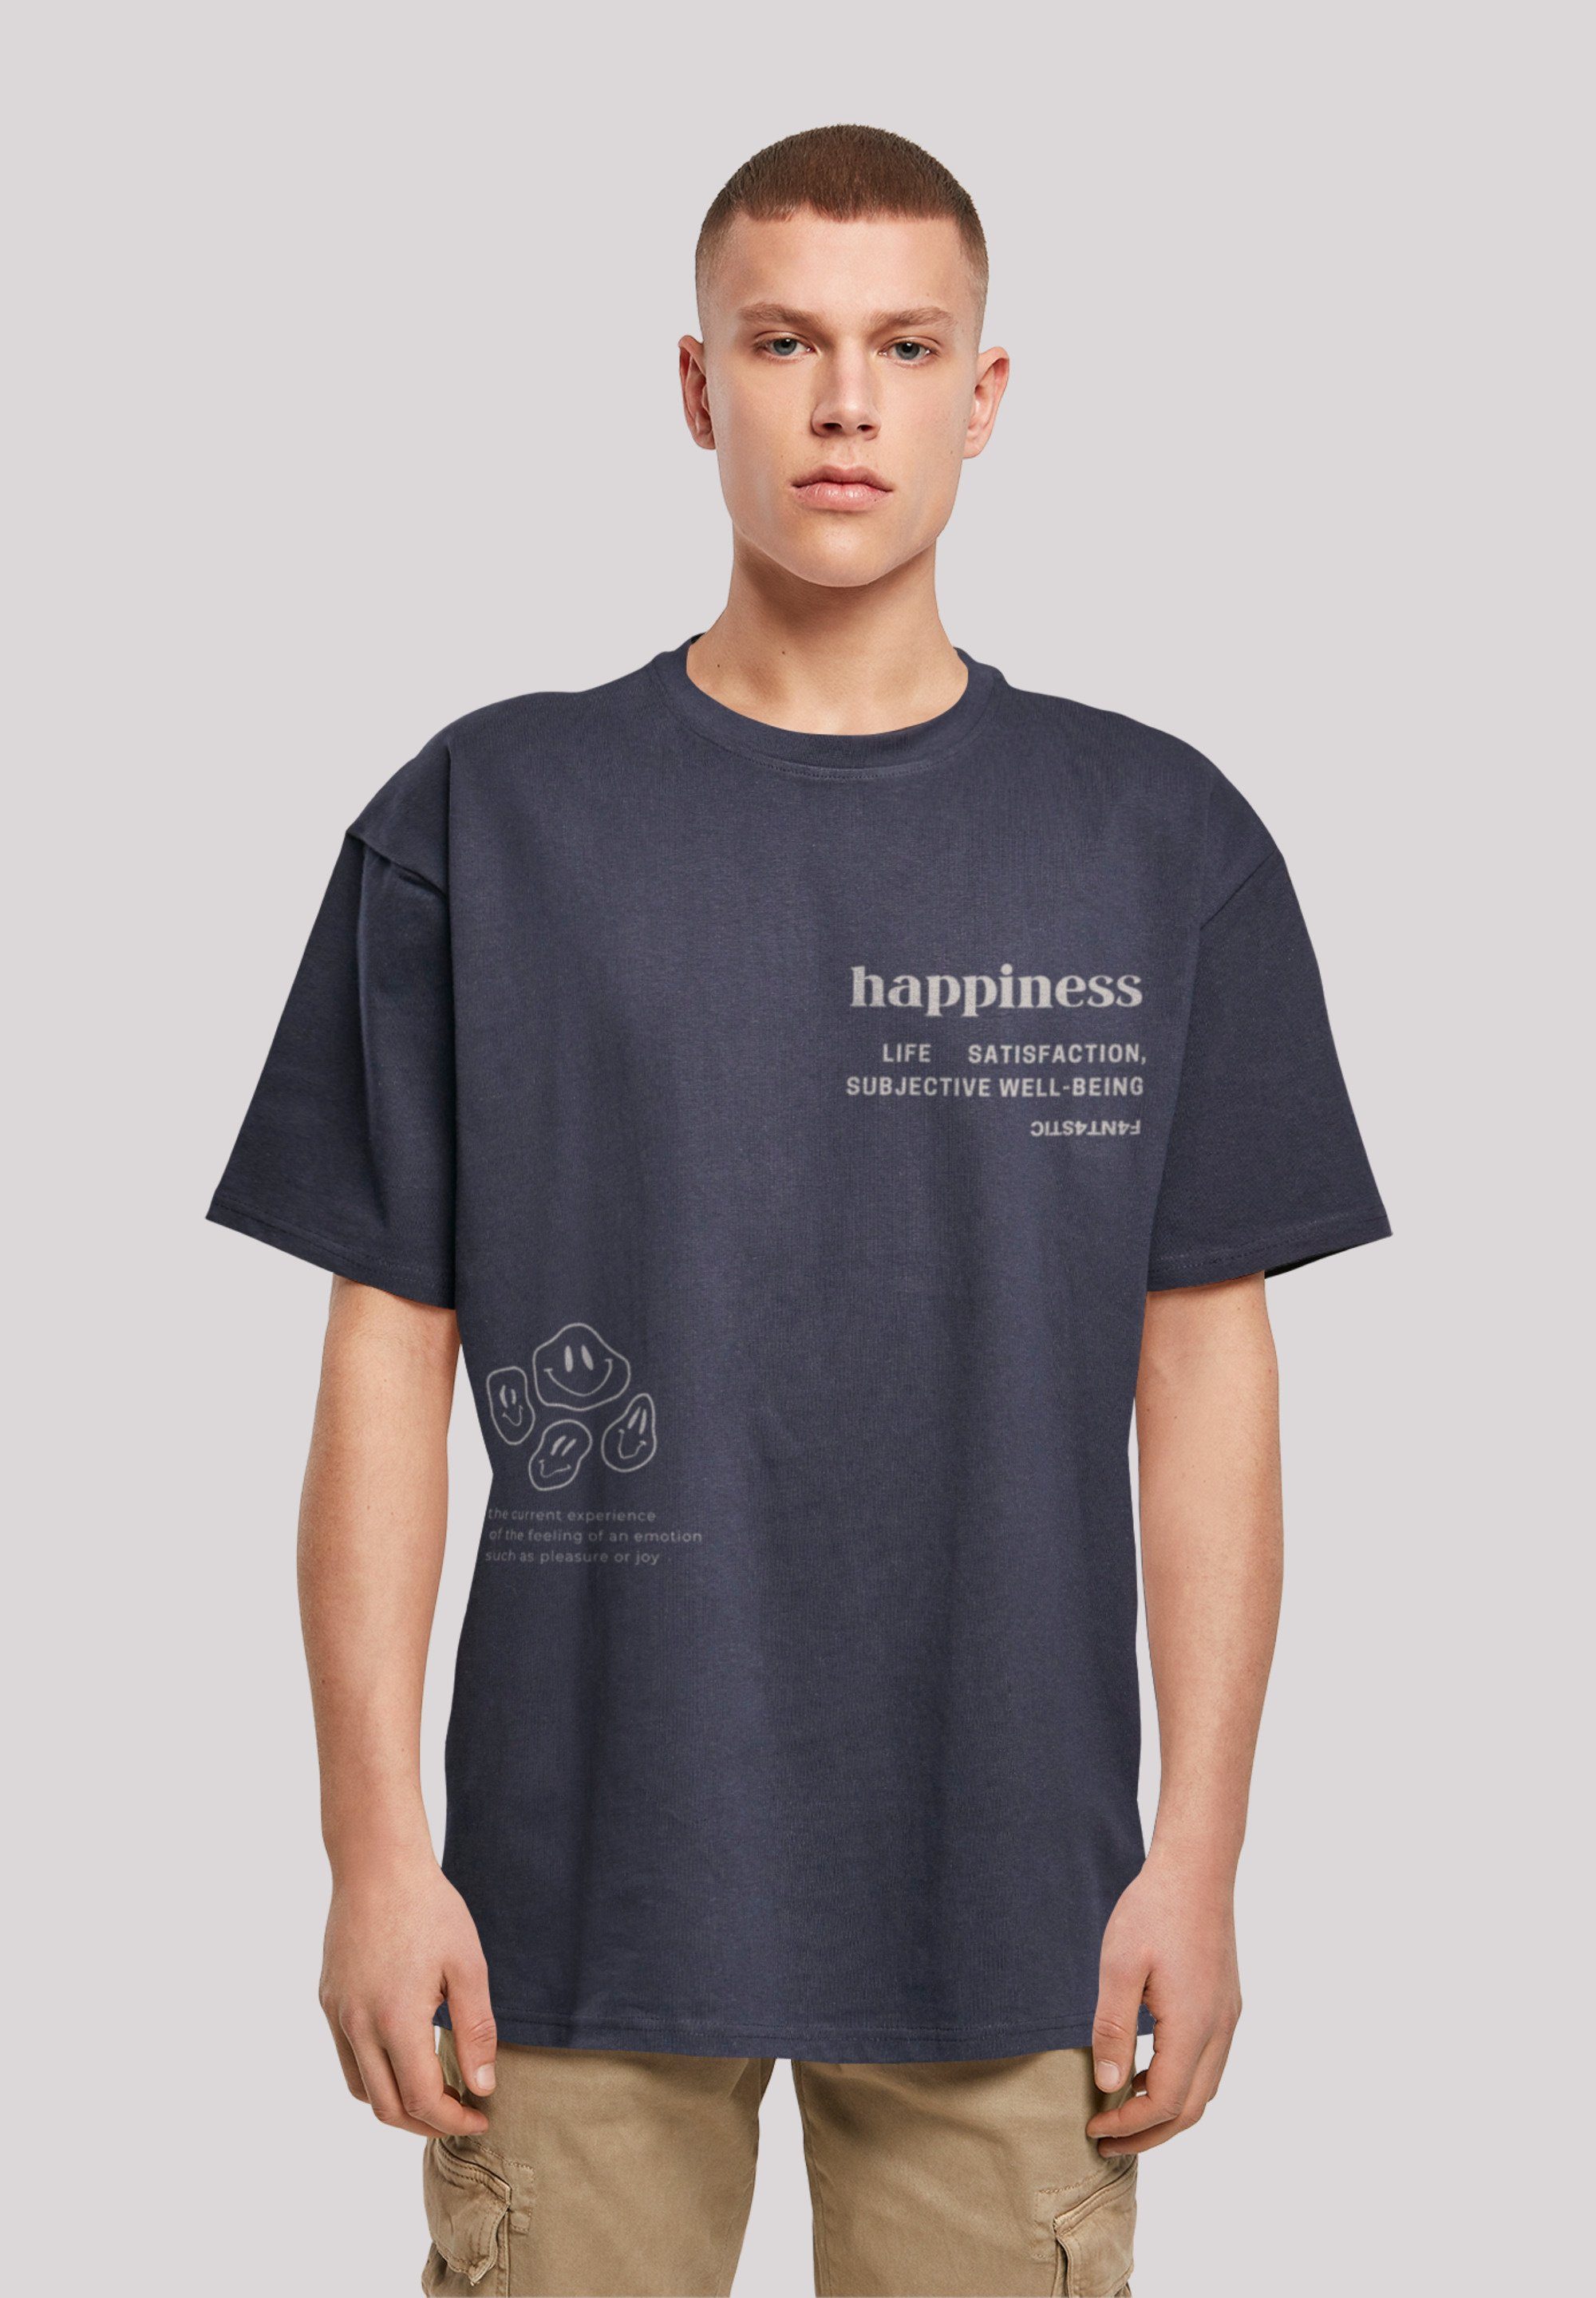 T-Shirt navy Print OVERSIZE TEE F4NT4STIC happiness